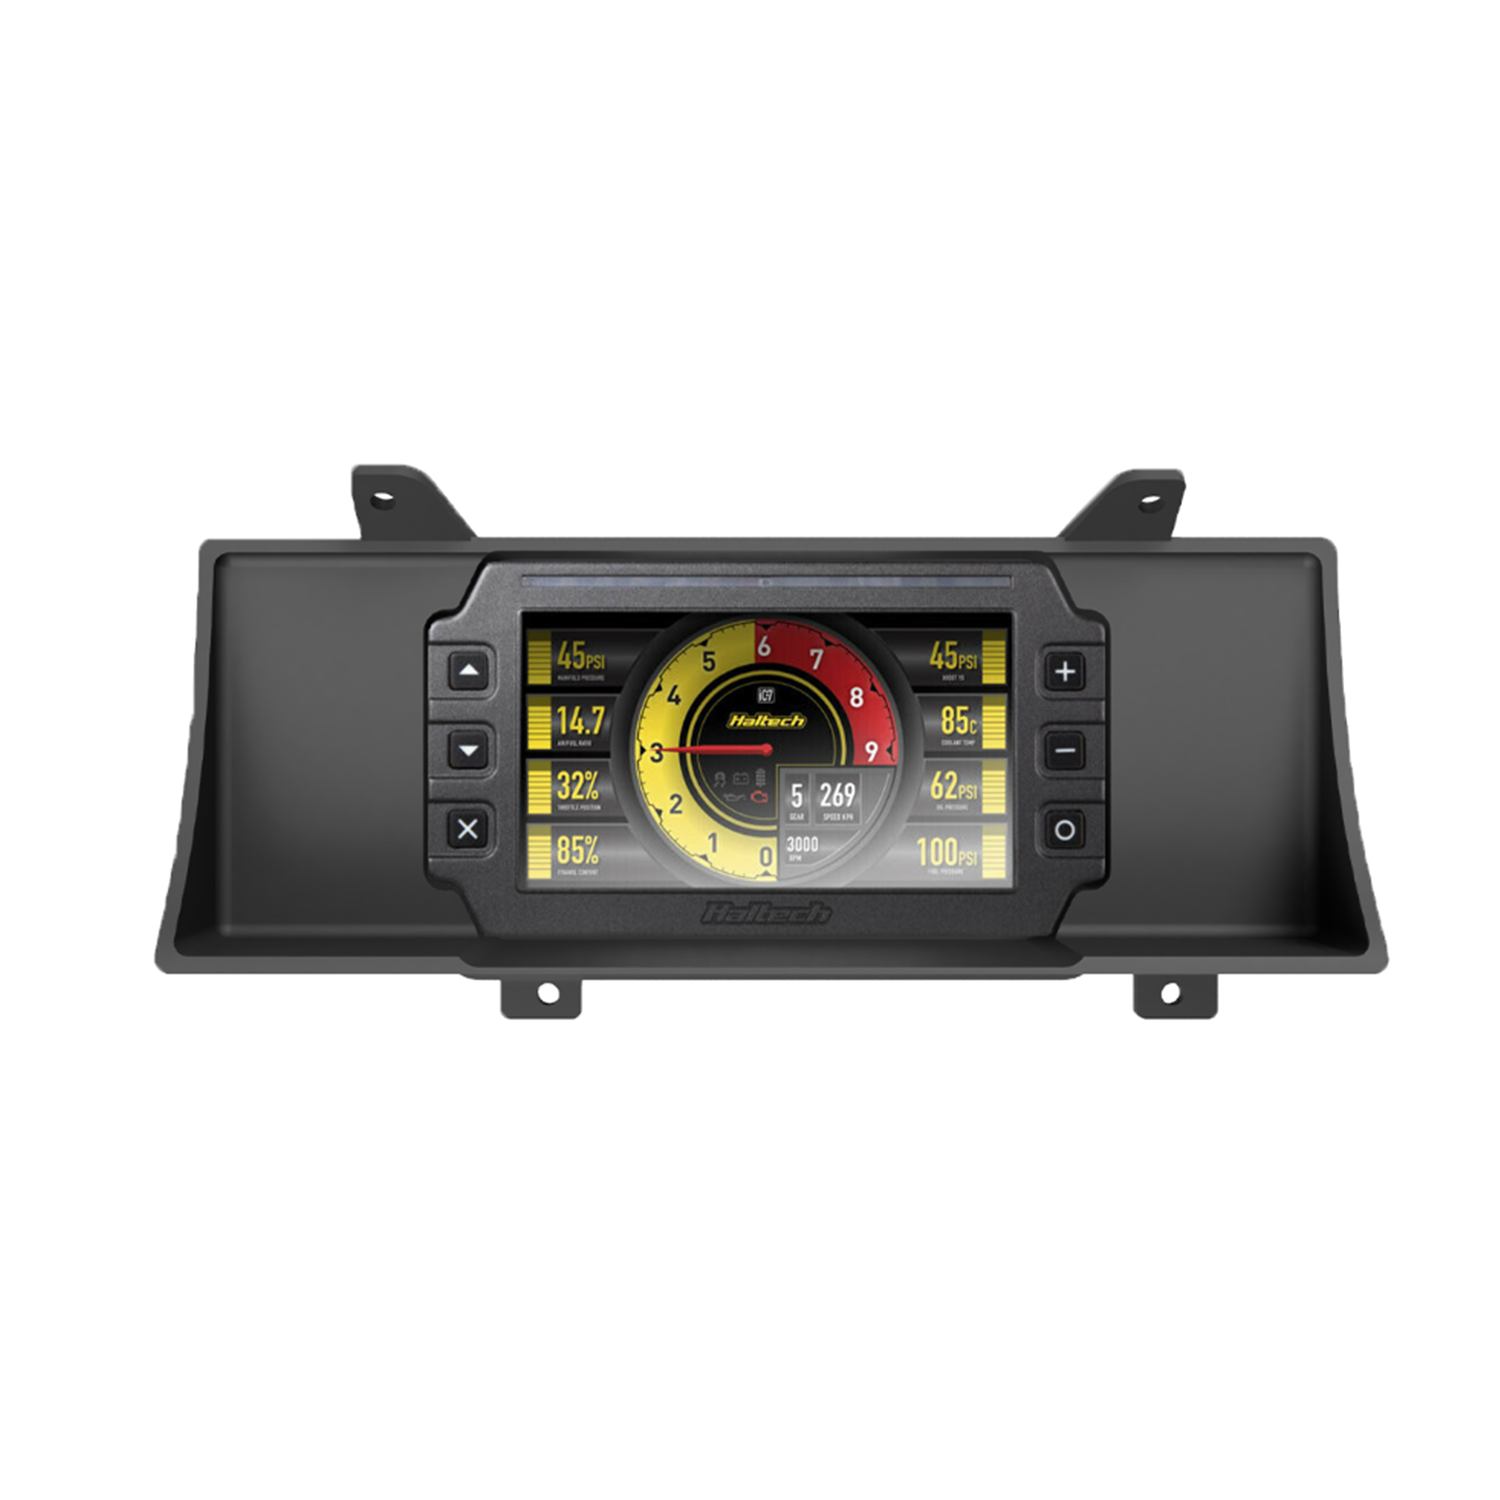 Nissan Patrol GQ Recessed Dash Mount for the Haltech iC-7 (display not included)